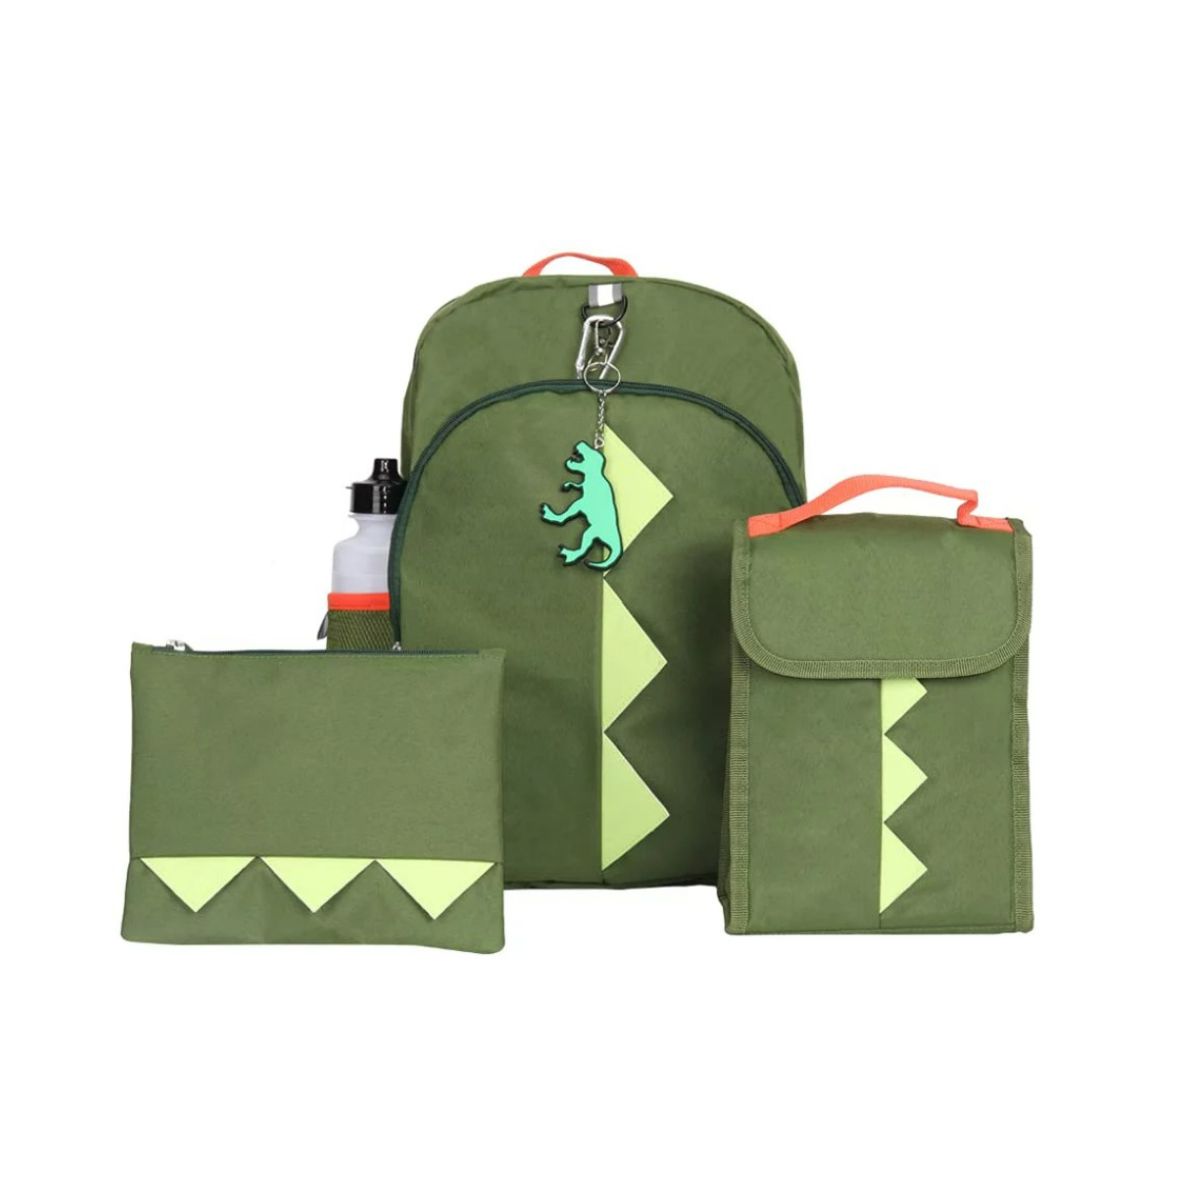 Green dinosaur backpack with roll-top lunch box and pencil case.